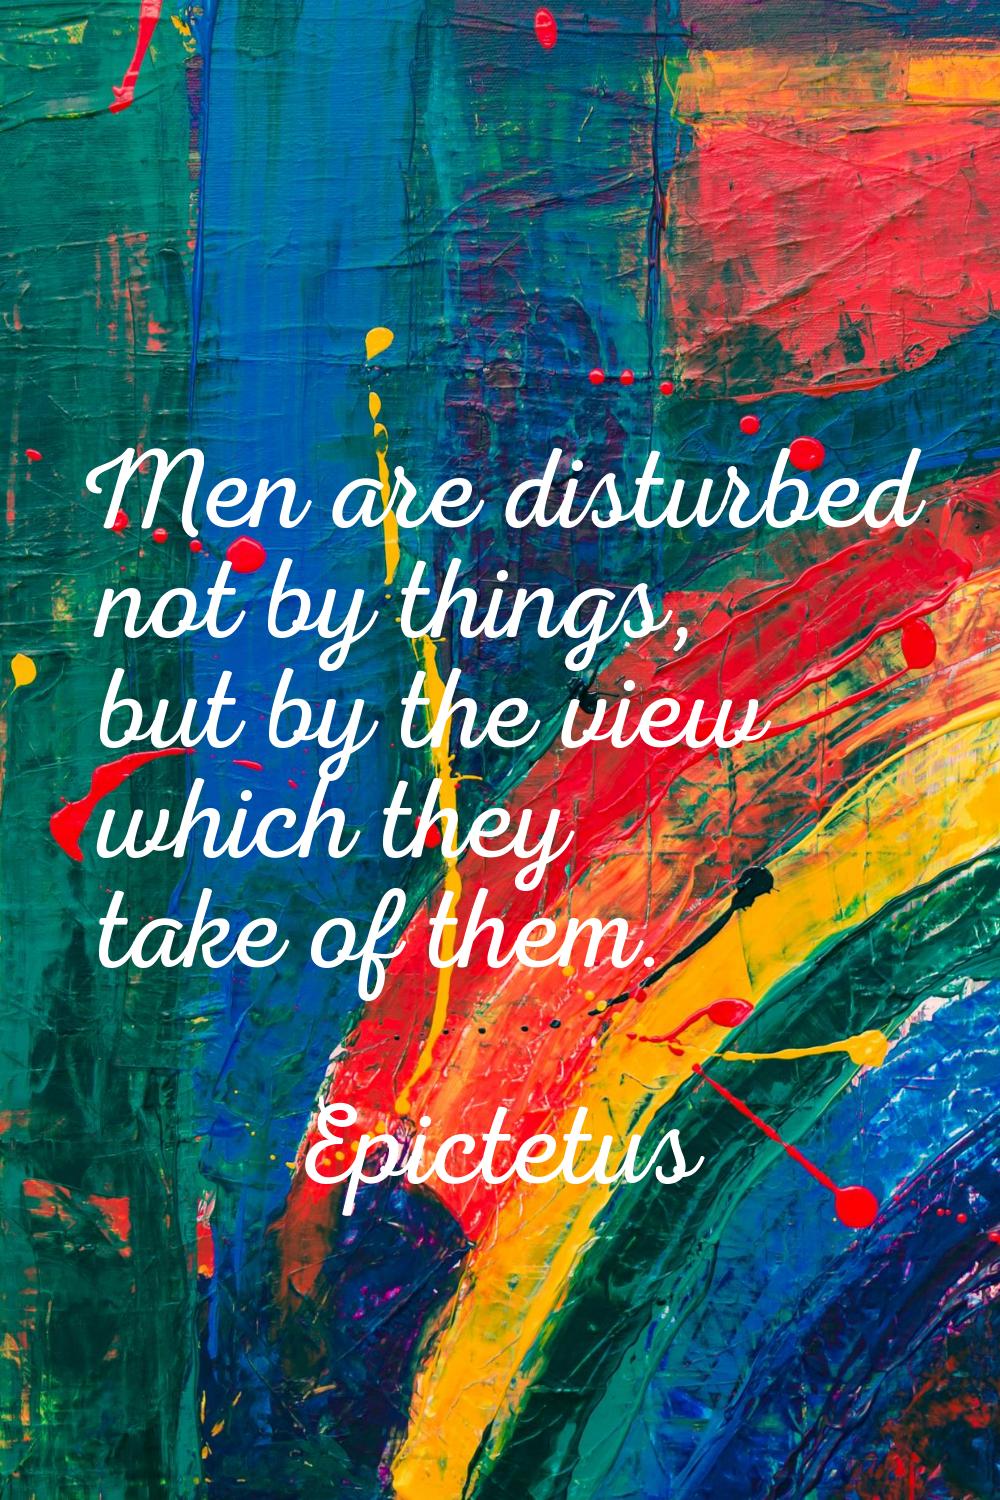 Men are disturbed not by things, but by the view which they take of them.